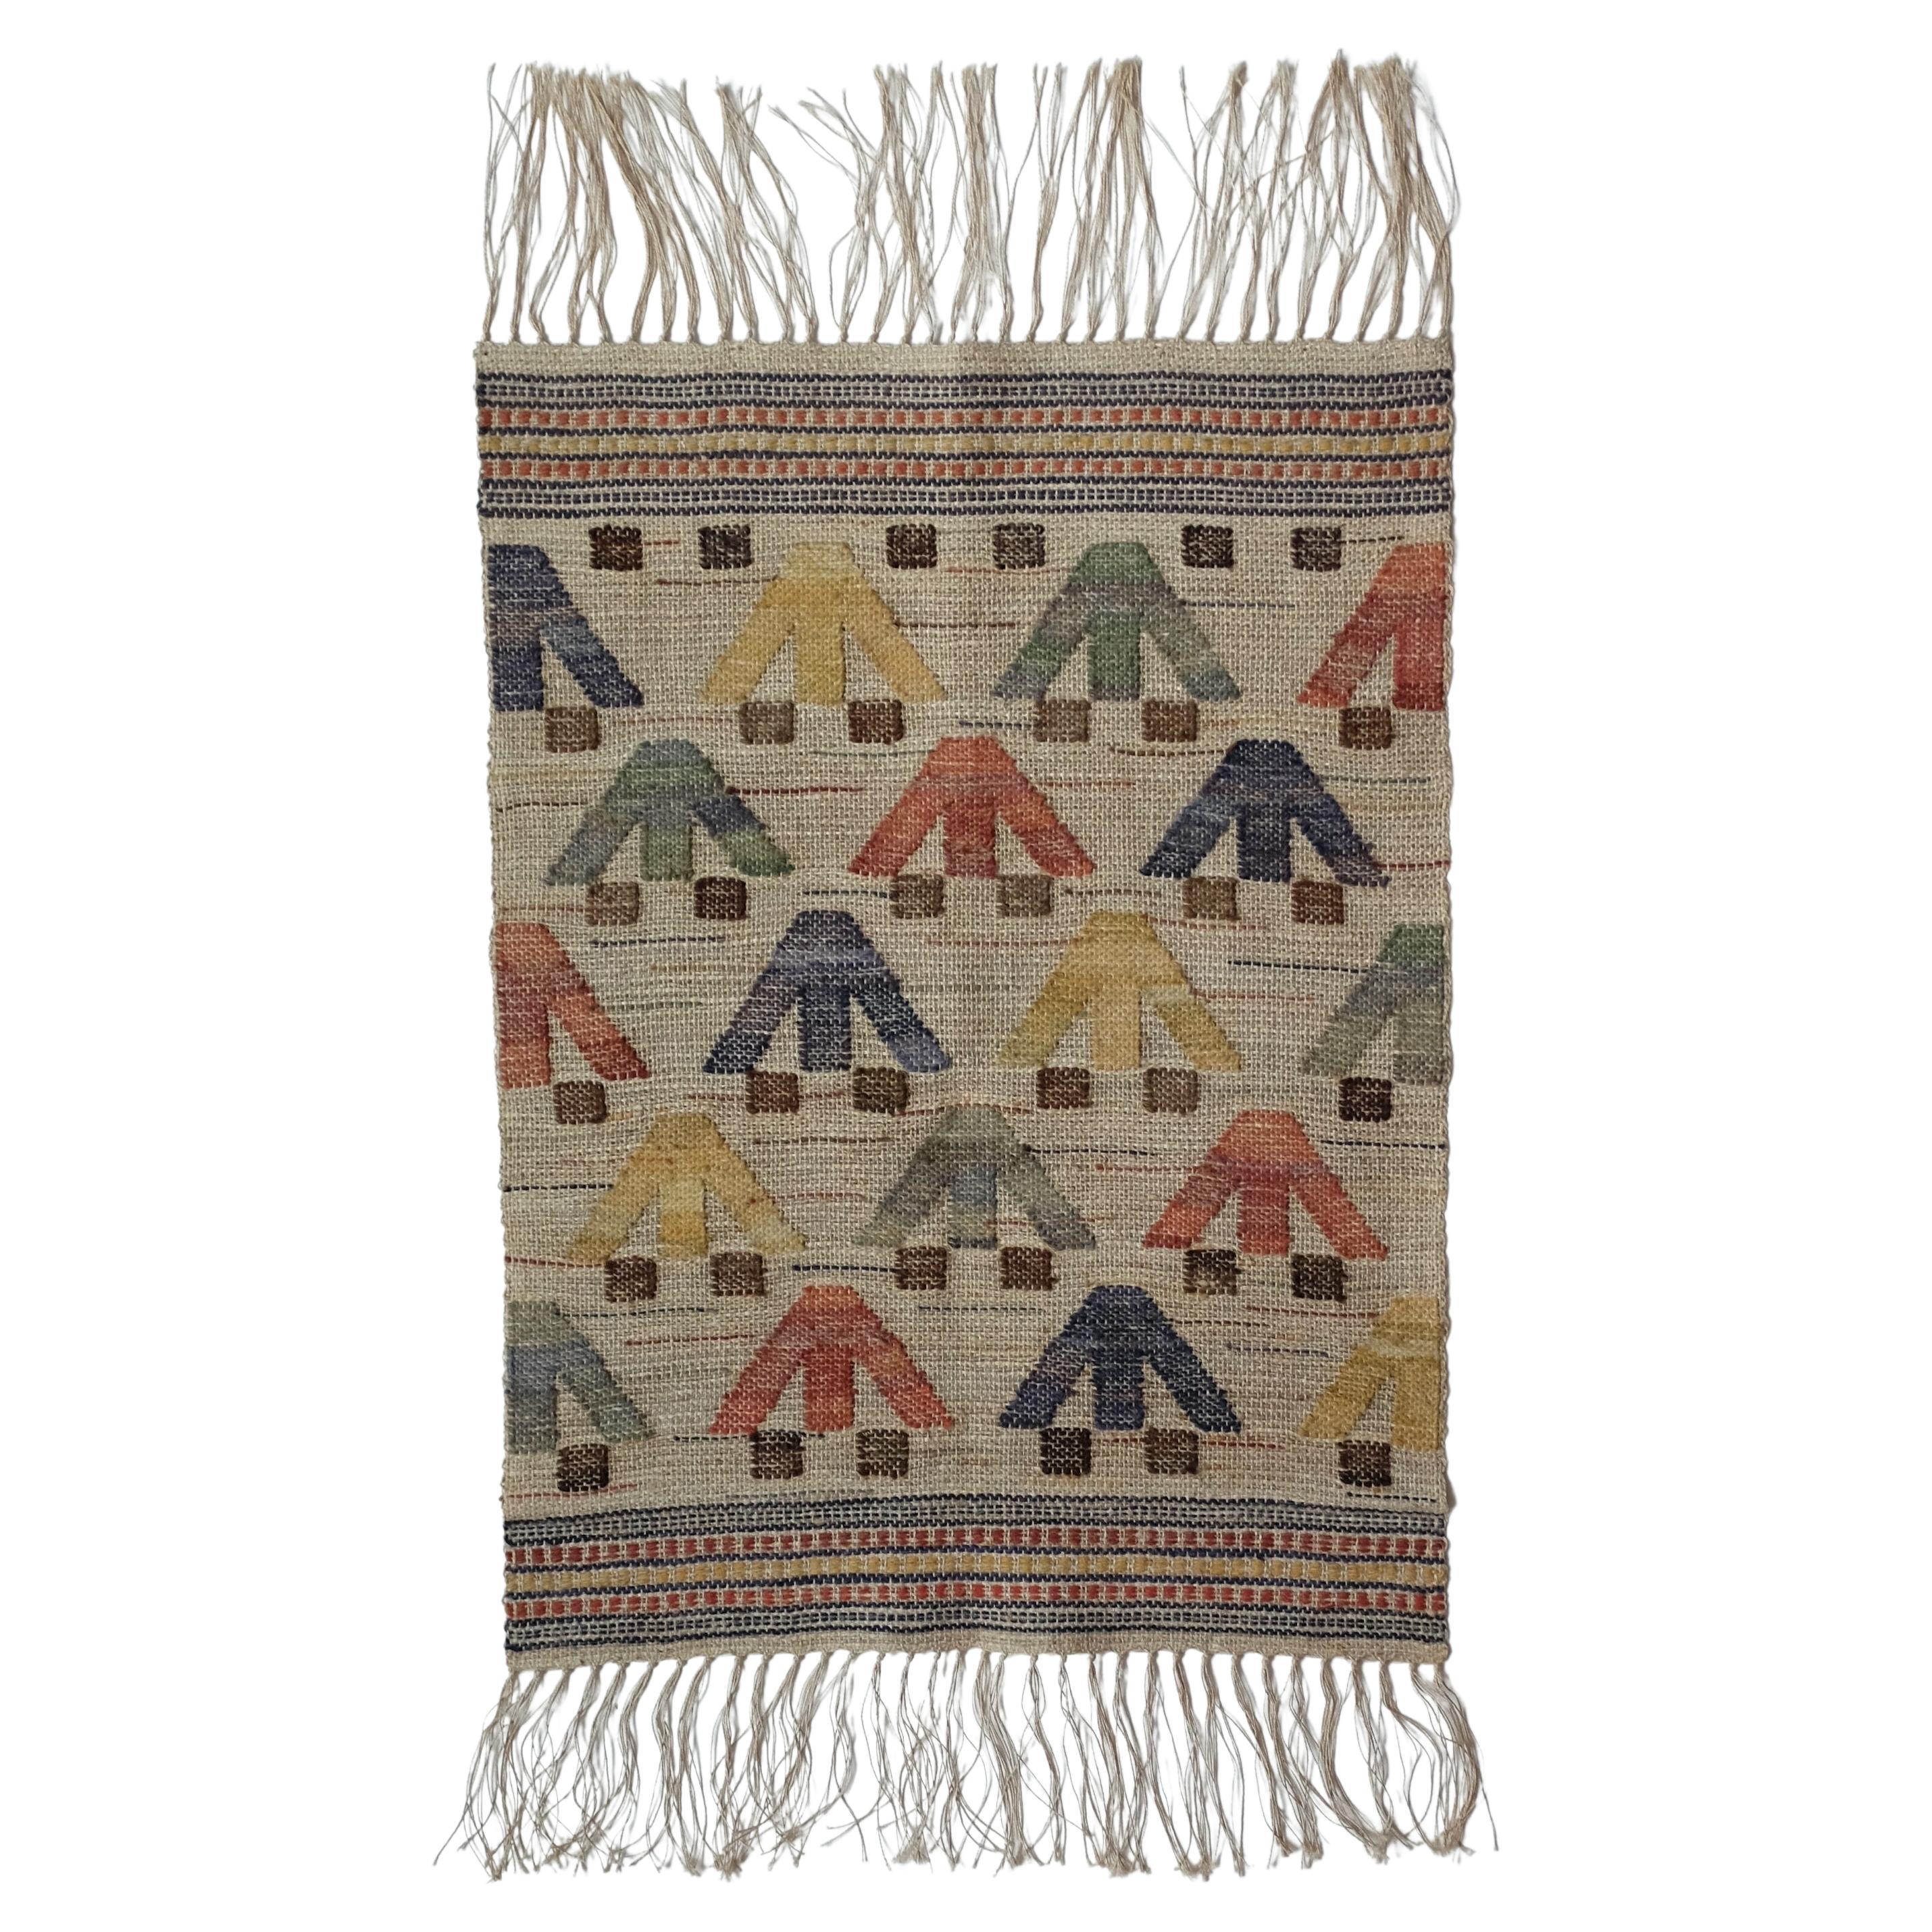 Vintage Swedish Linen and Wool Tapestry in the Style of Märta Måås Fjetterström For Sale